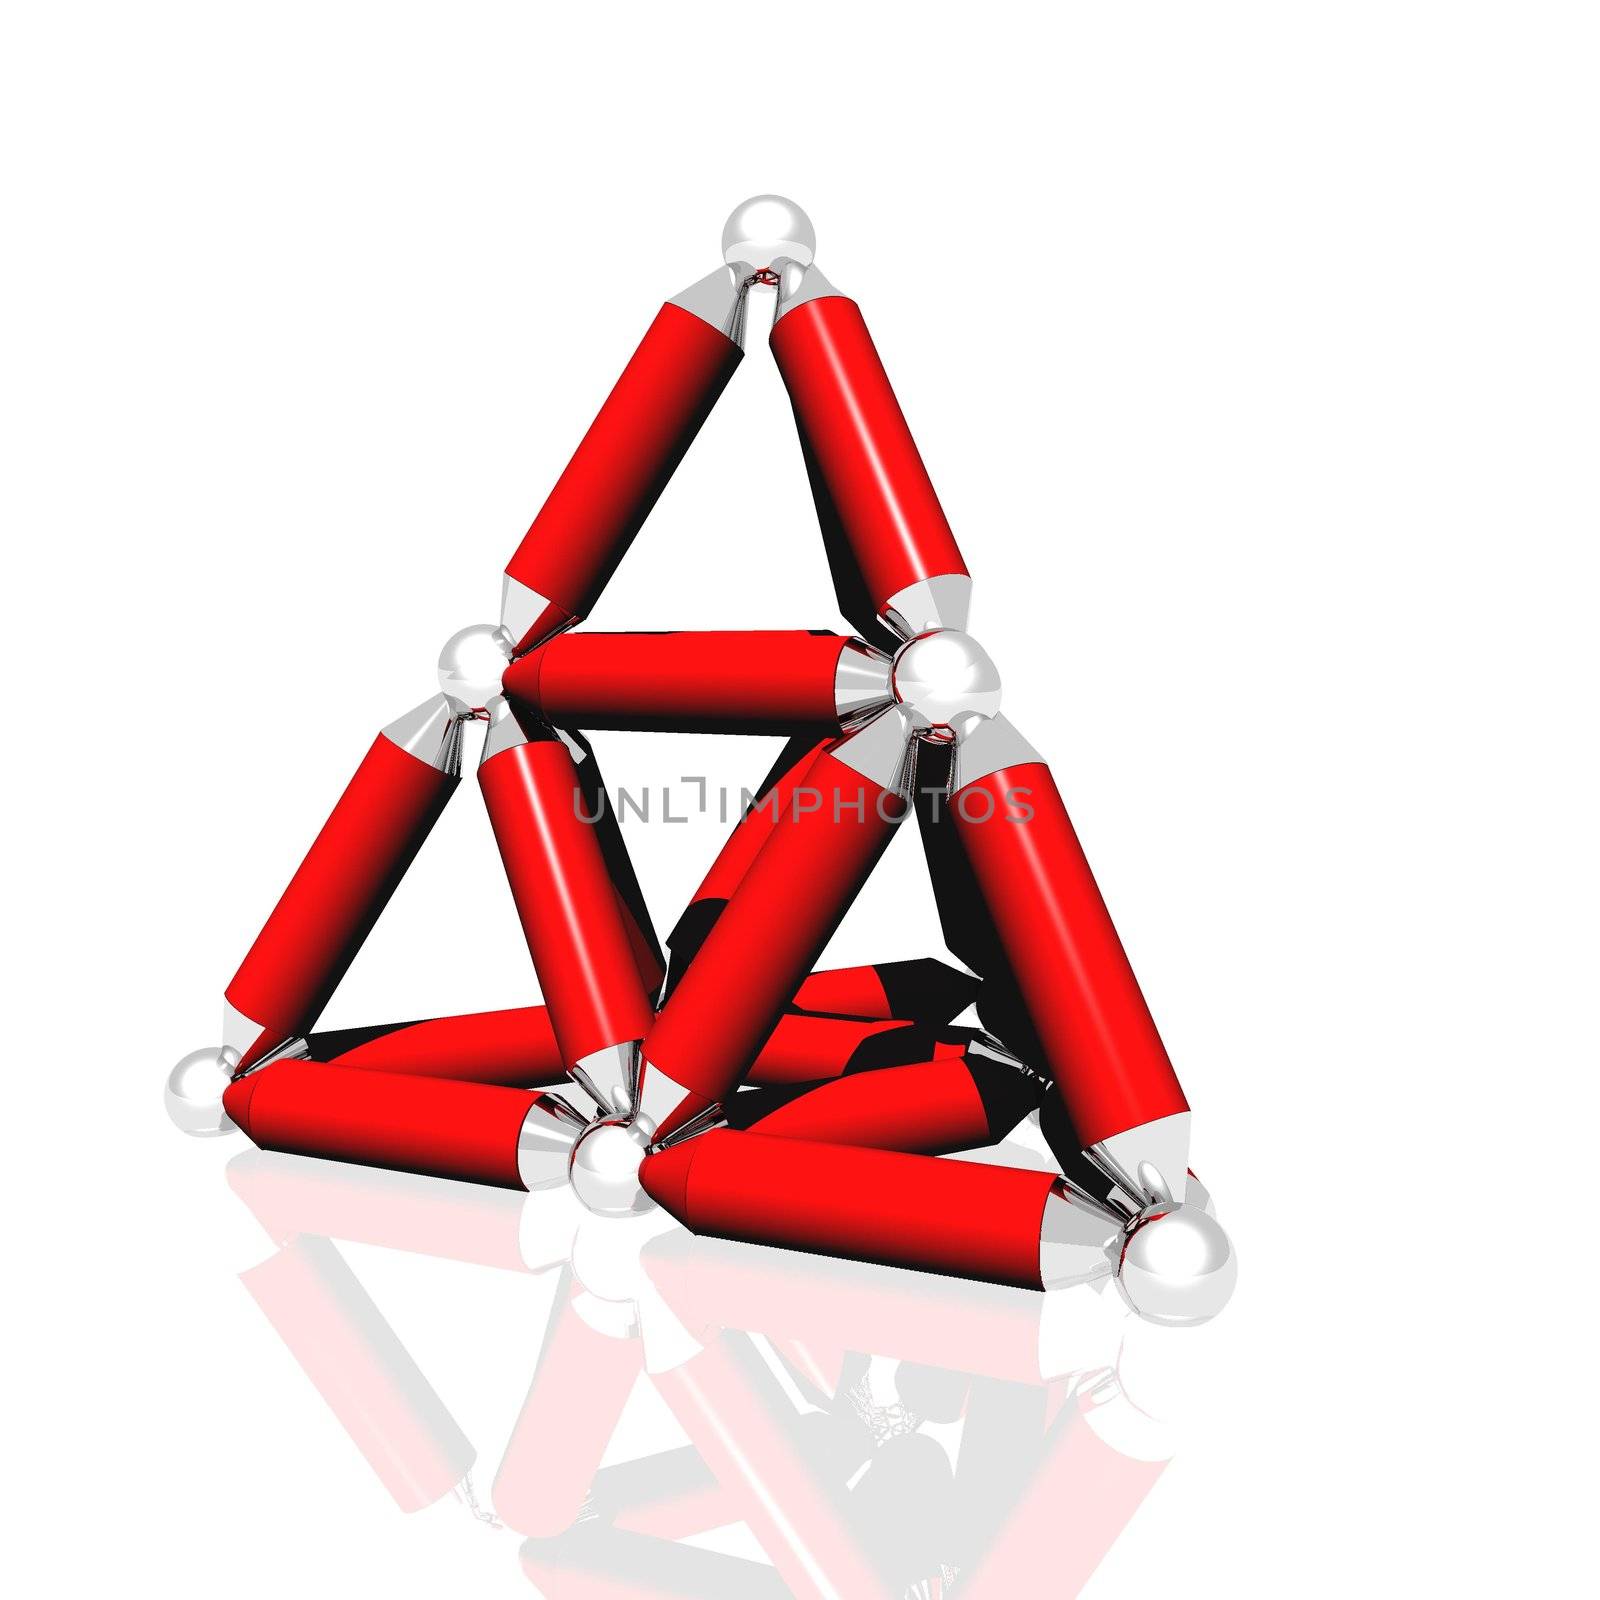 A virtual representation of strength utilizing the triangle, the most structurally sound shape in nature.